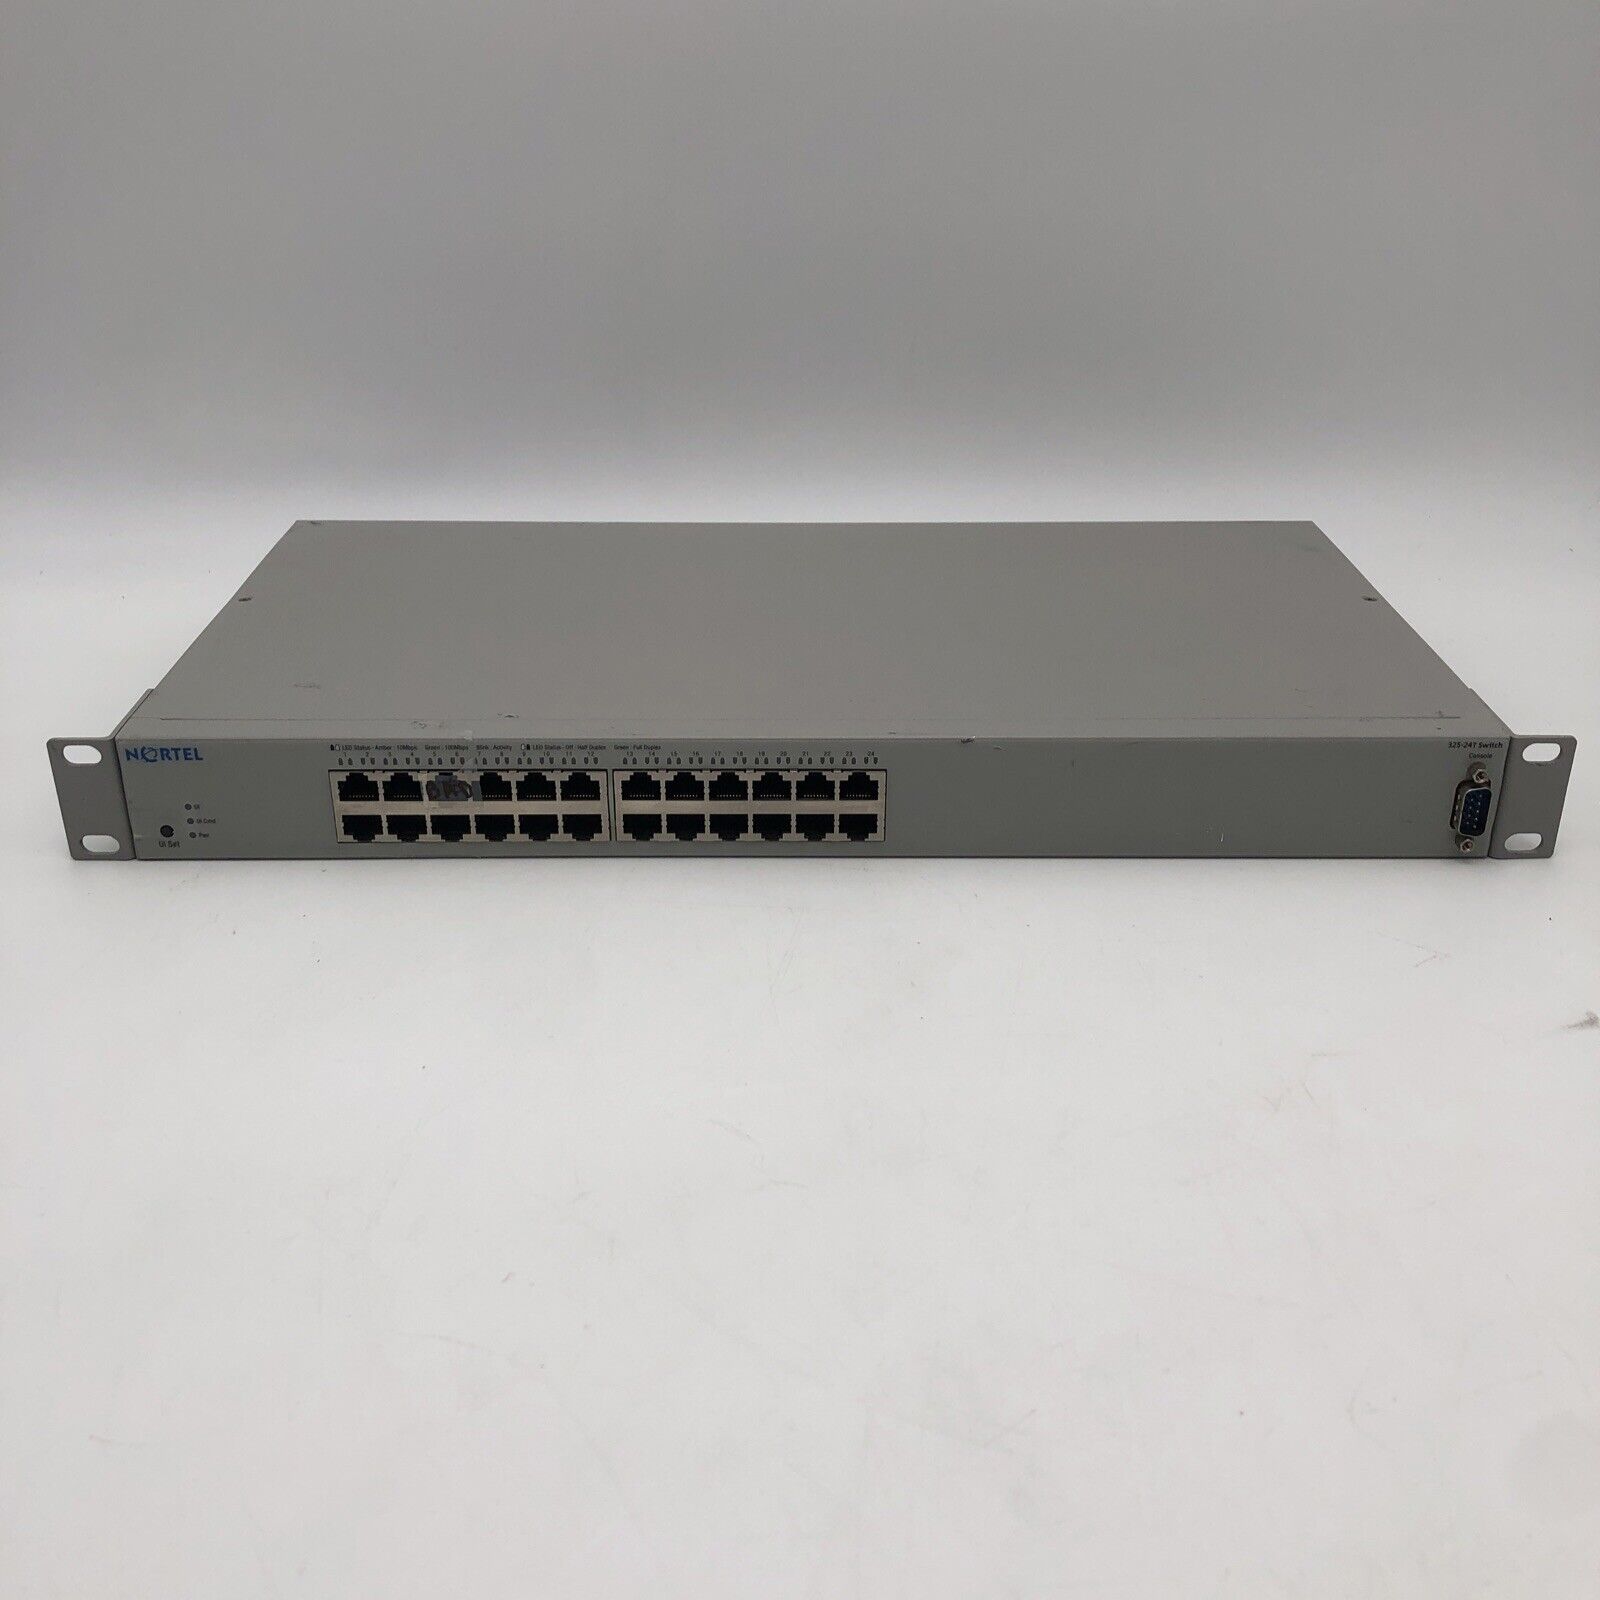 Nortel Networks 325-24T 24-Ports 10/100 Ethernet Switch